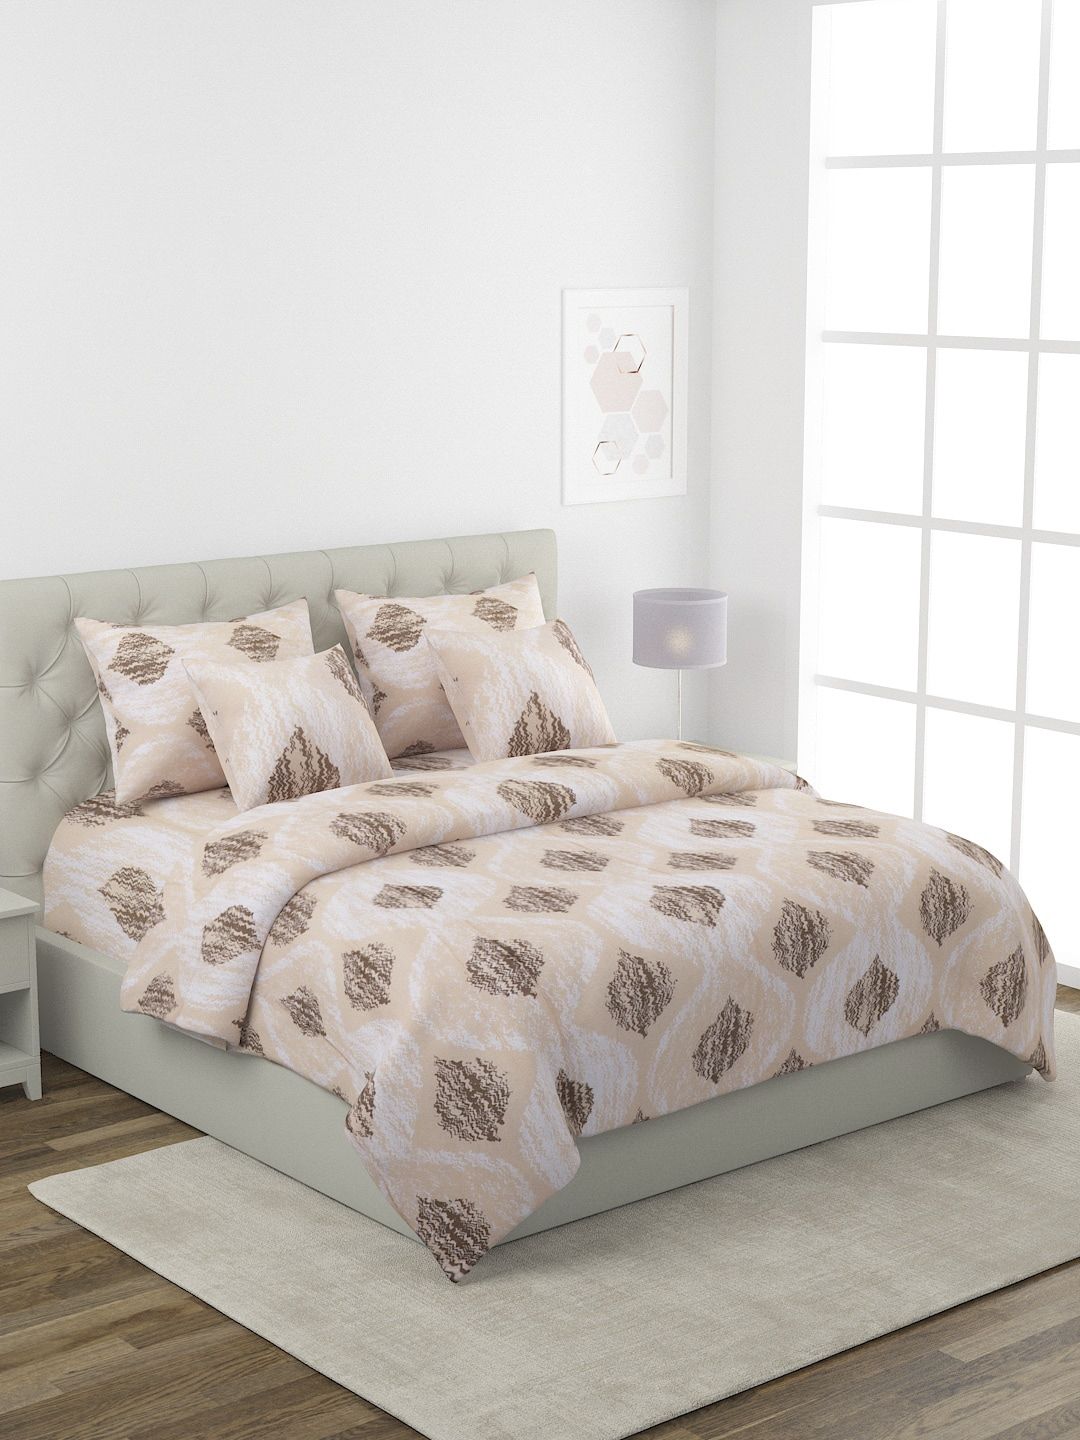 ROMEE Peach-Coloured & Brown Printed Pure Cotton Superfine Double King Bedding Set Price in India